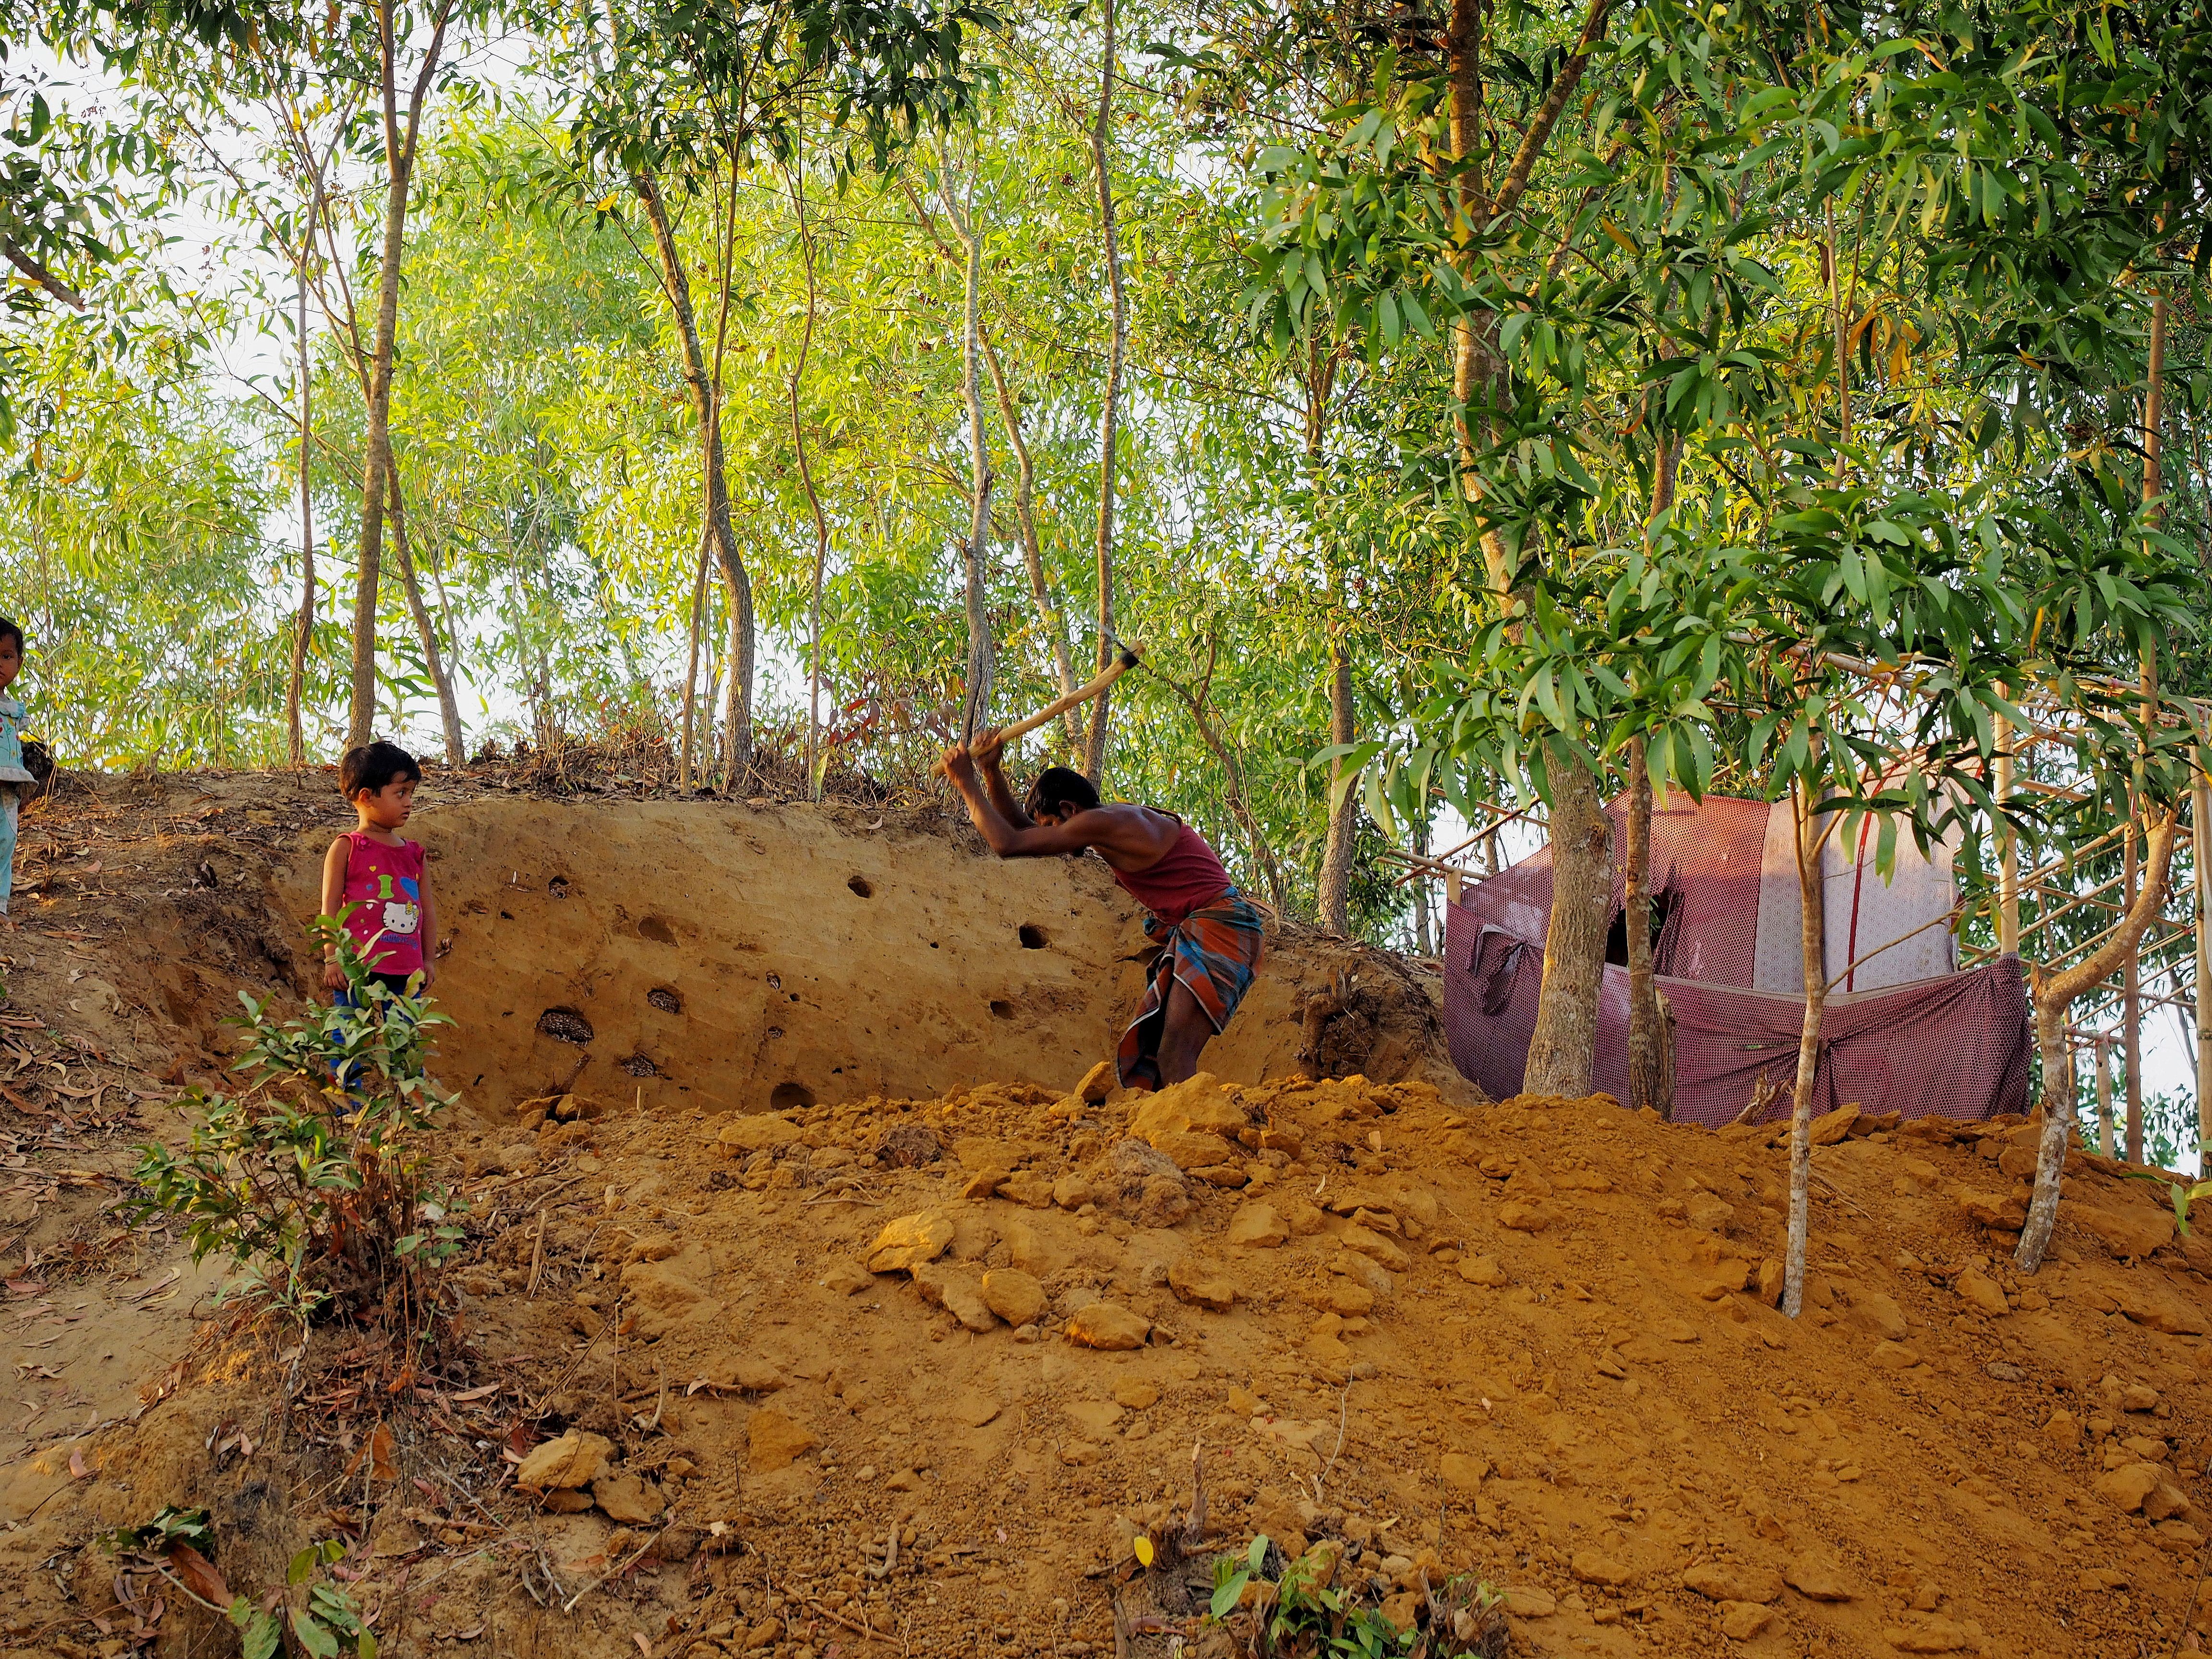 Rohingya refugee digging foundation for new house in squatter refugee camp. Image by Doug Bock Clark. Bangladesh, 2017.